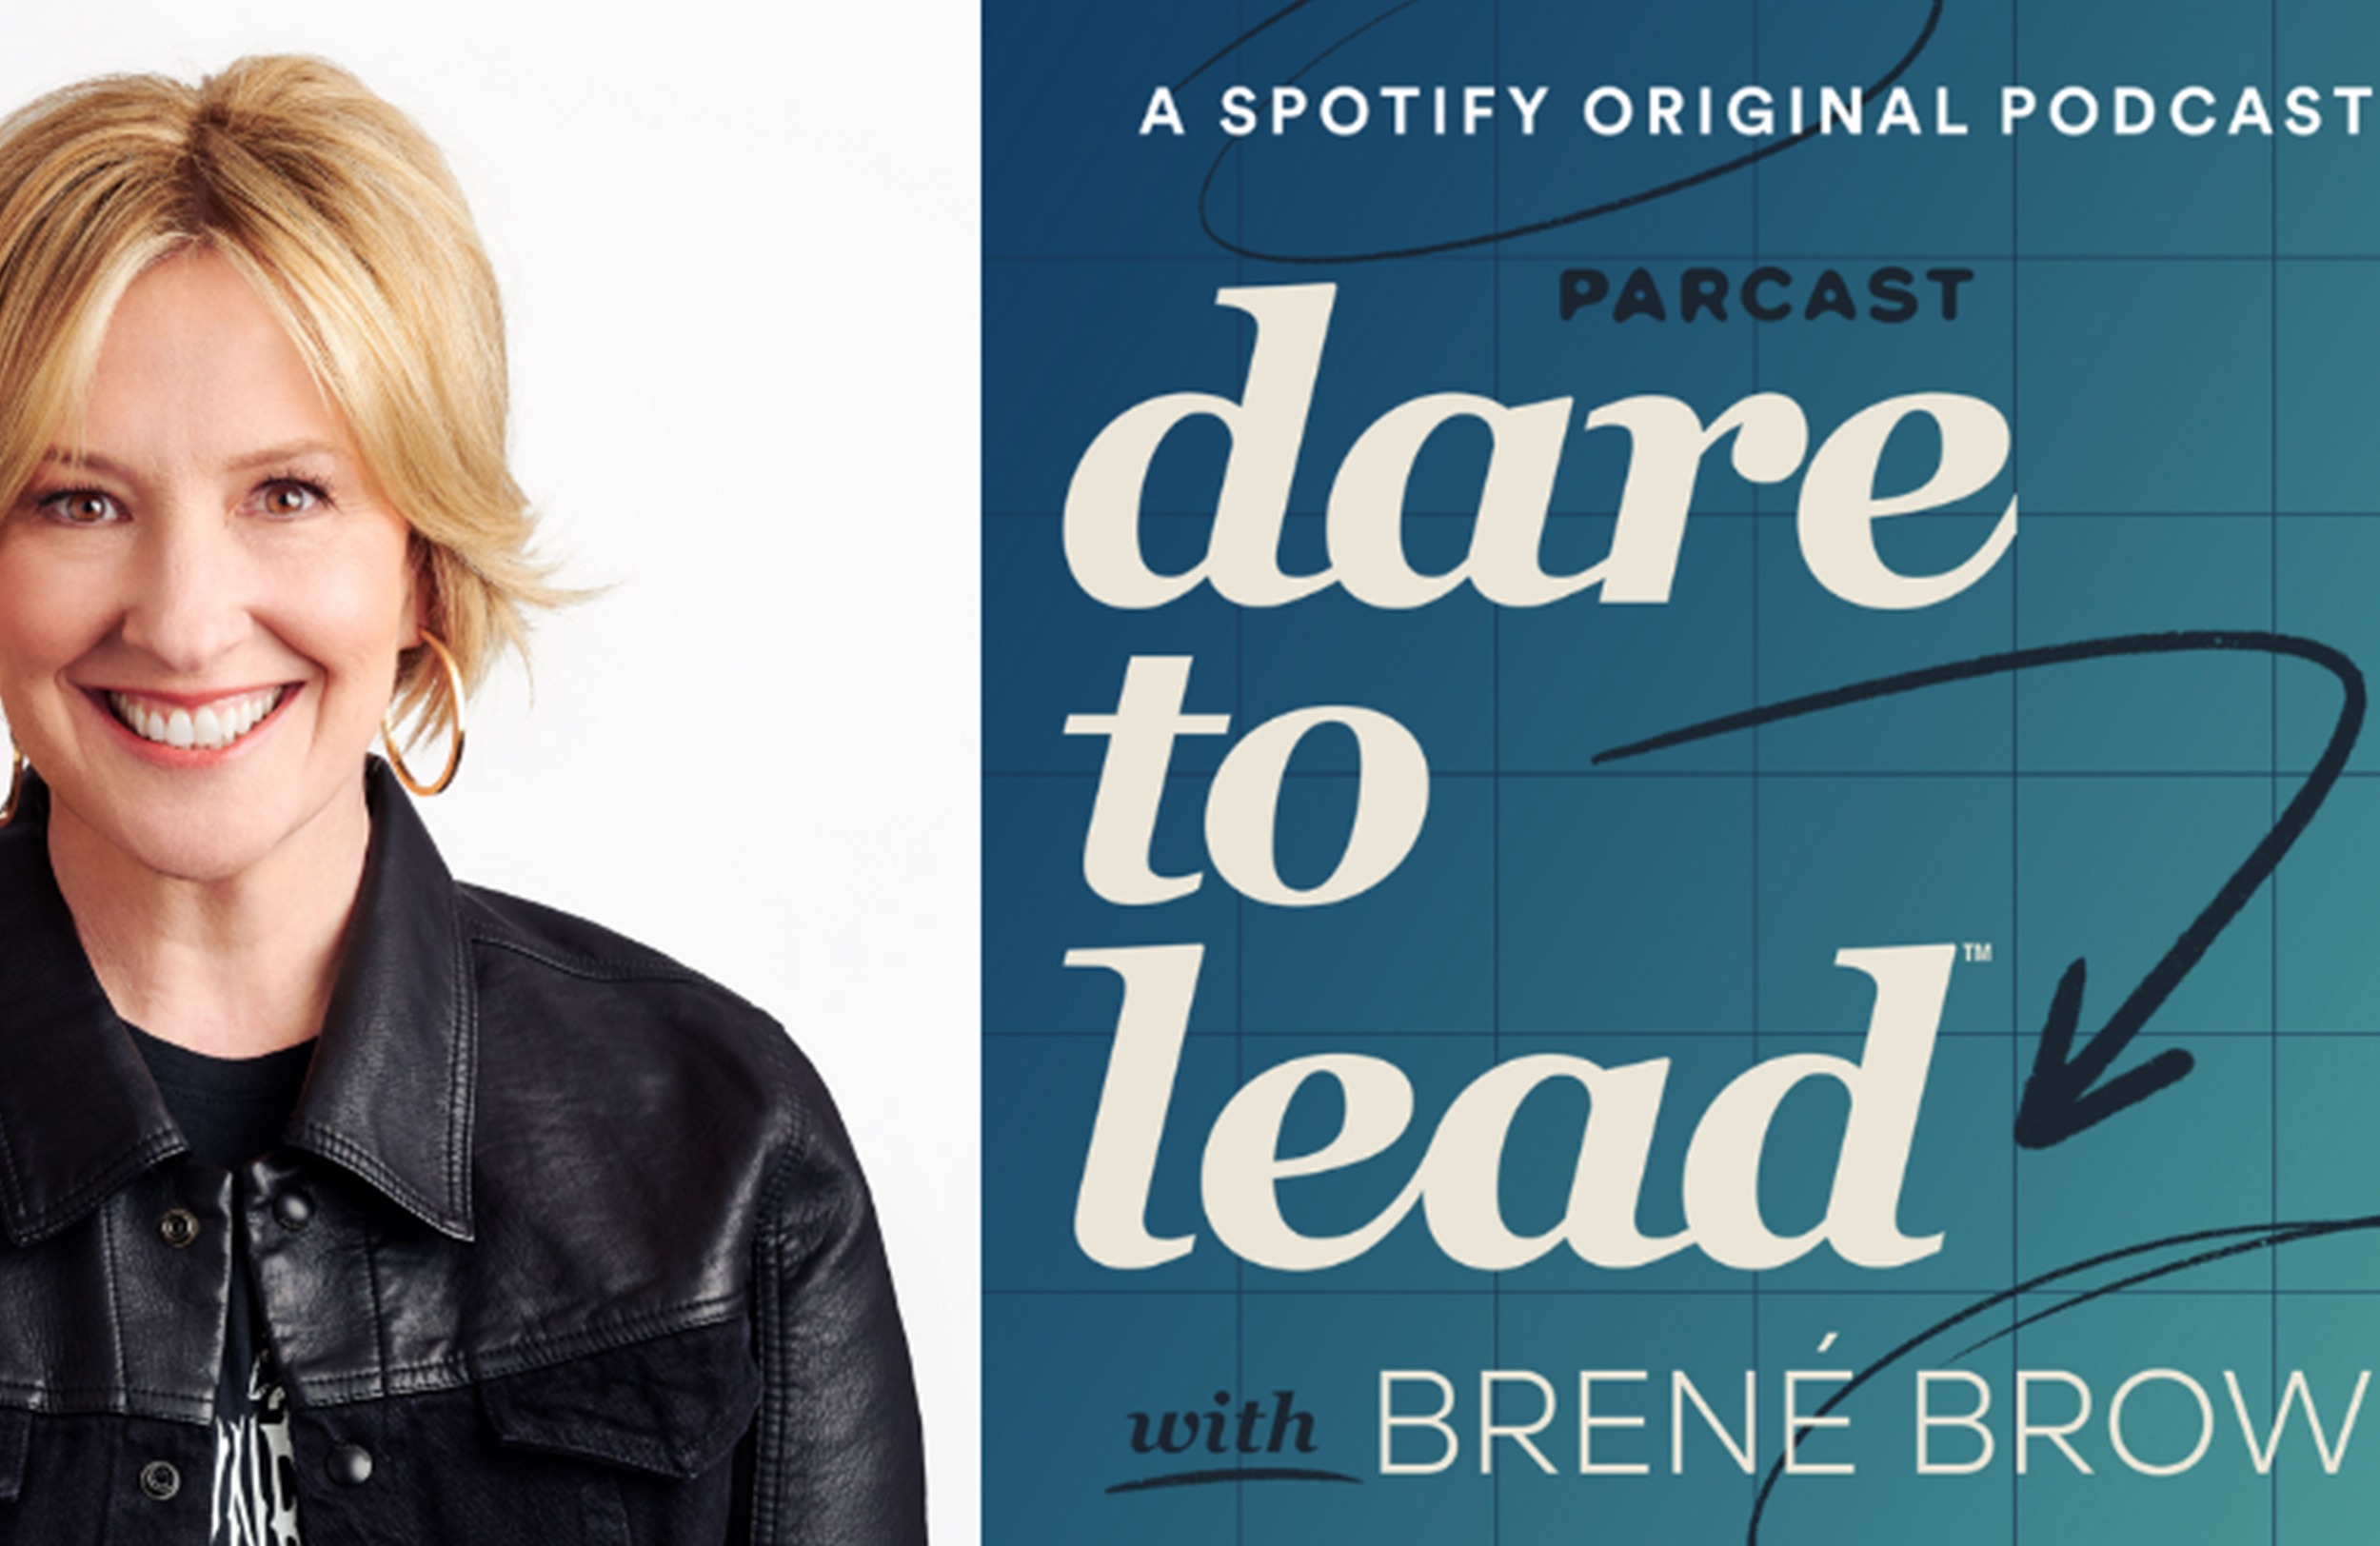 Dare to lead podcast with Brene Brown